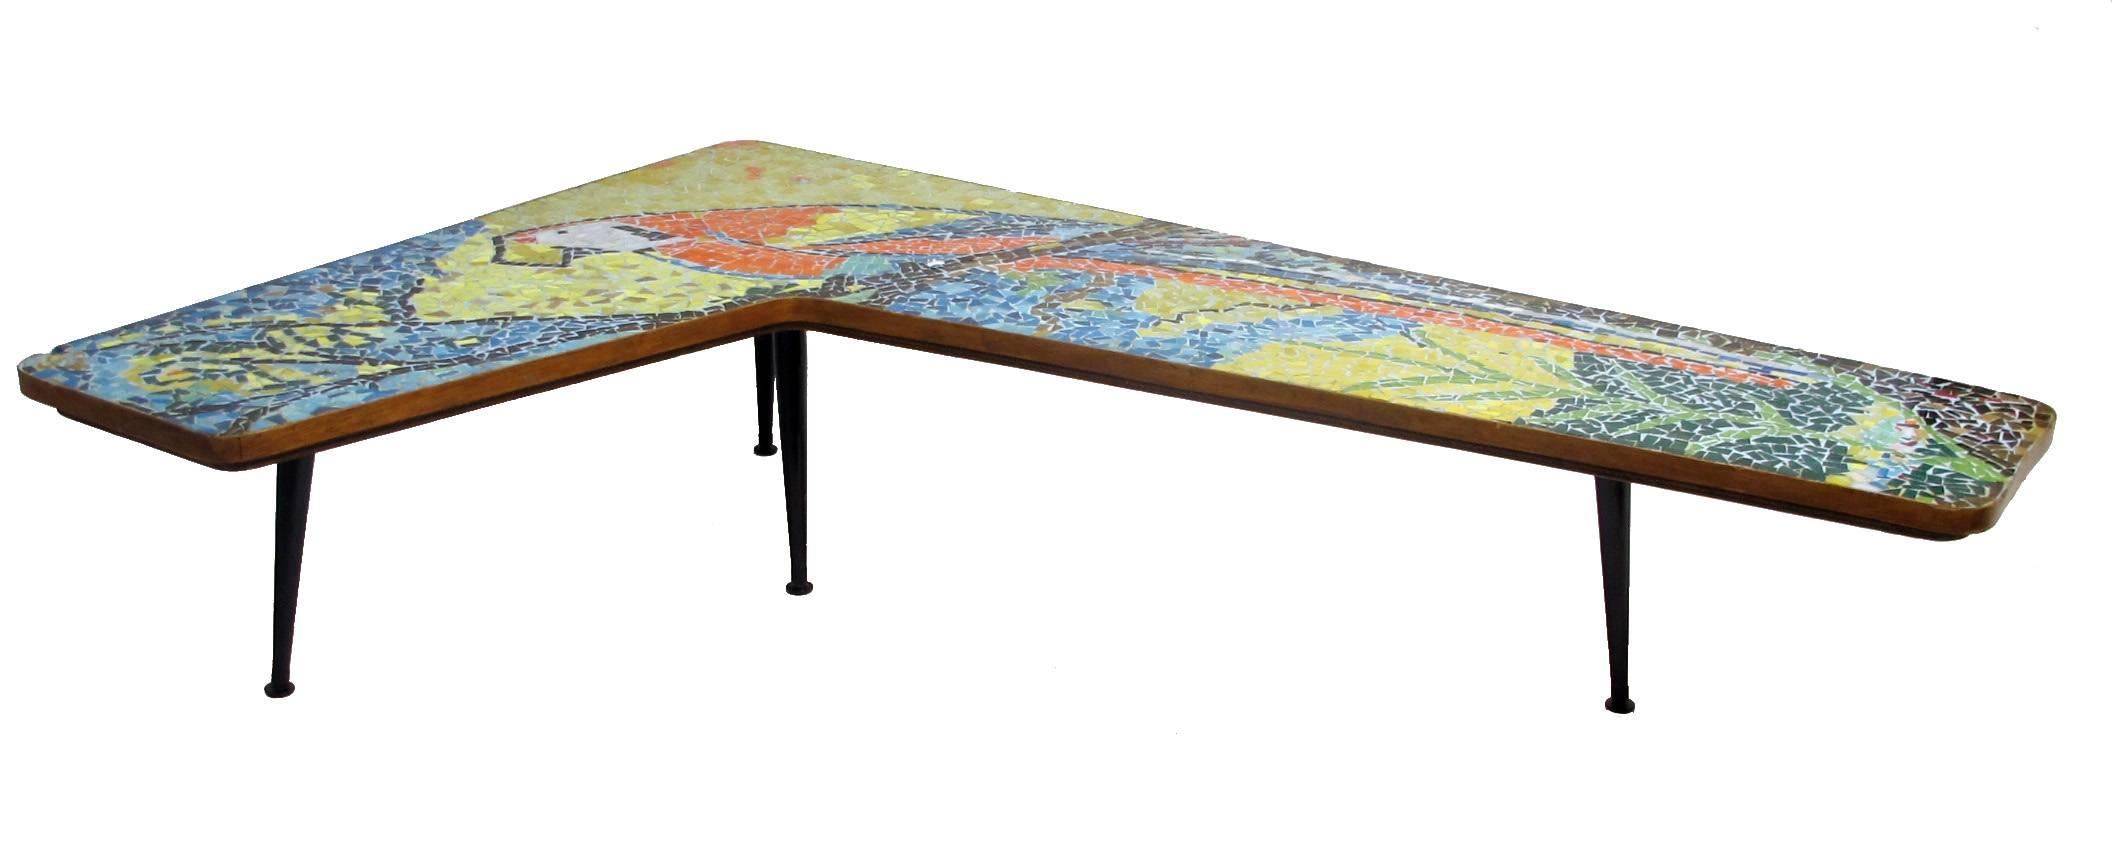 American Mid-Century Mosaic Tile Parrot Coffee Table